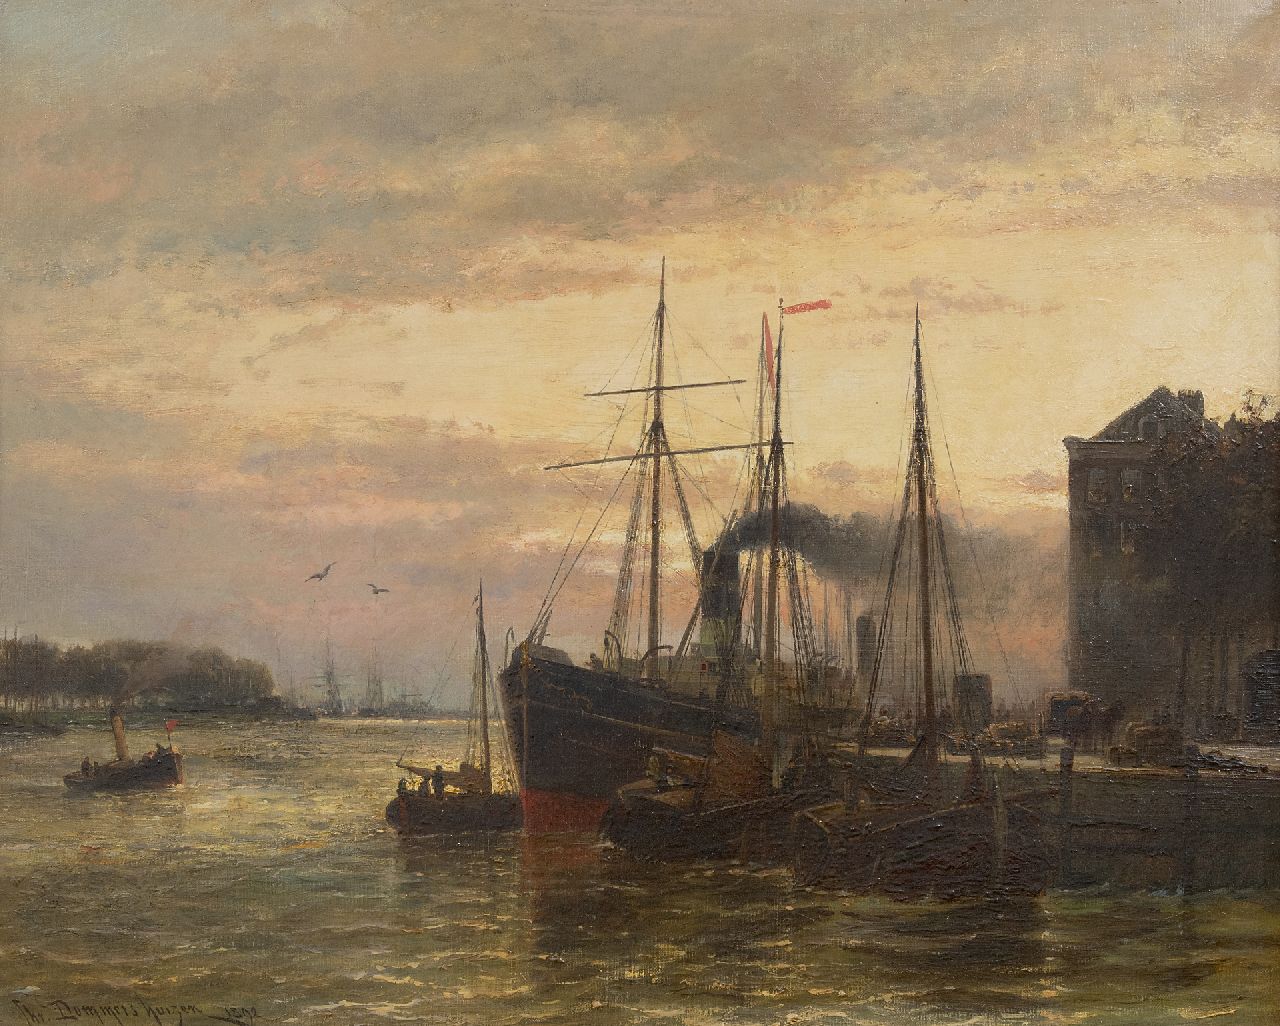 Dommelshuizen C.C.  | Cornelis Christiaan Dommelshuizen | Paintings offered for sale | Cargo ship at the quay in Rotterdam, oil on canvas 52.5 x 65.5 cm, signed l.l. and dated 1892